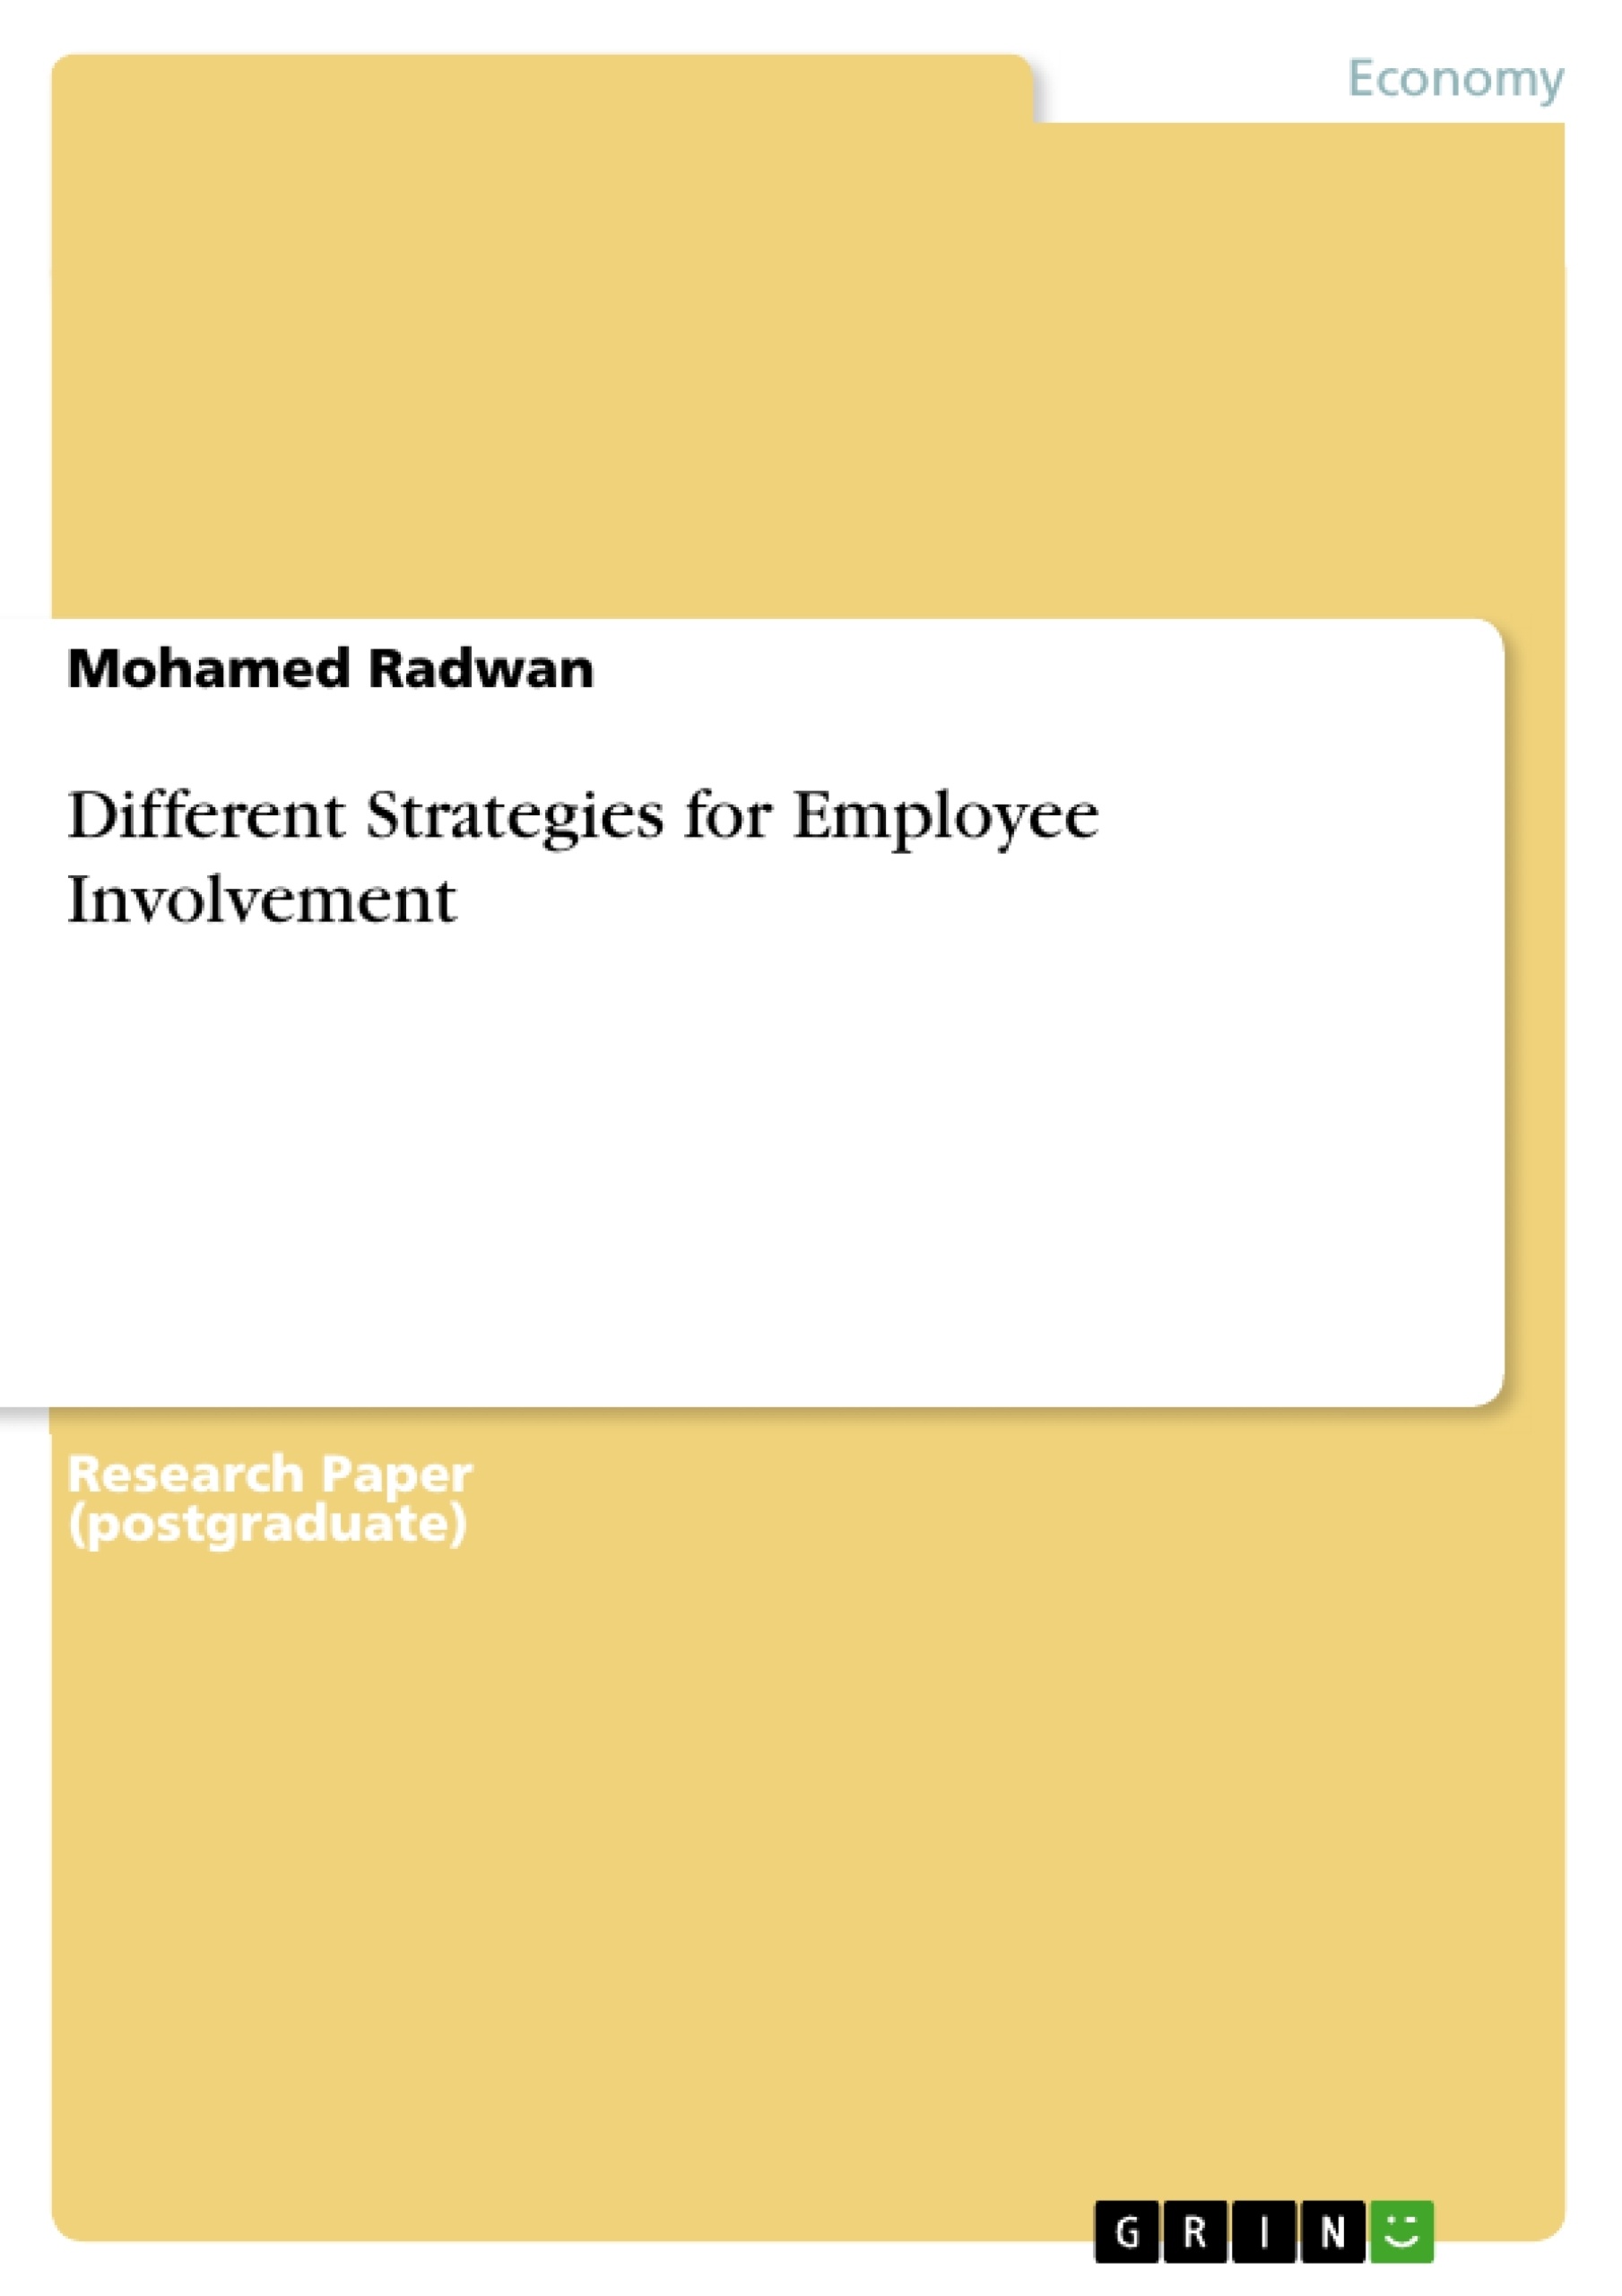 Title: Different Strategies for Employee Involvement